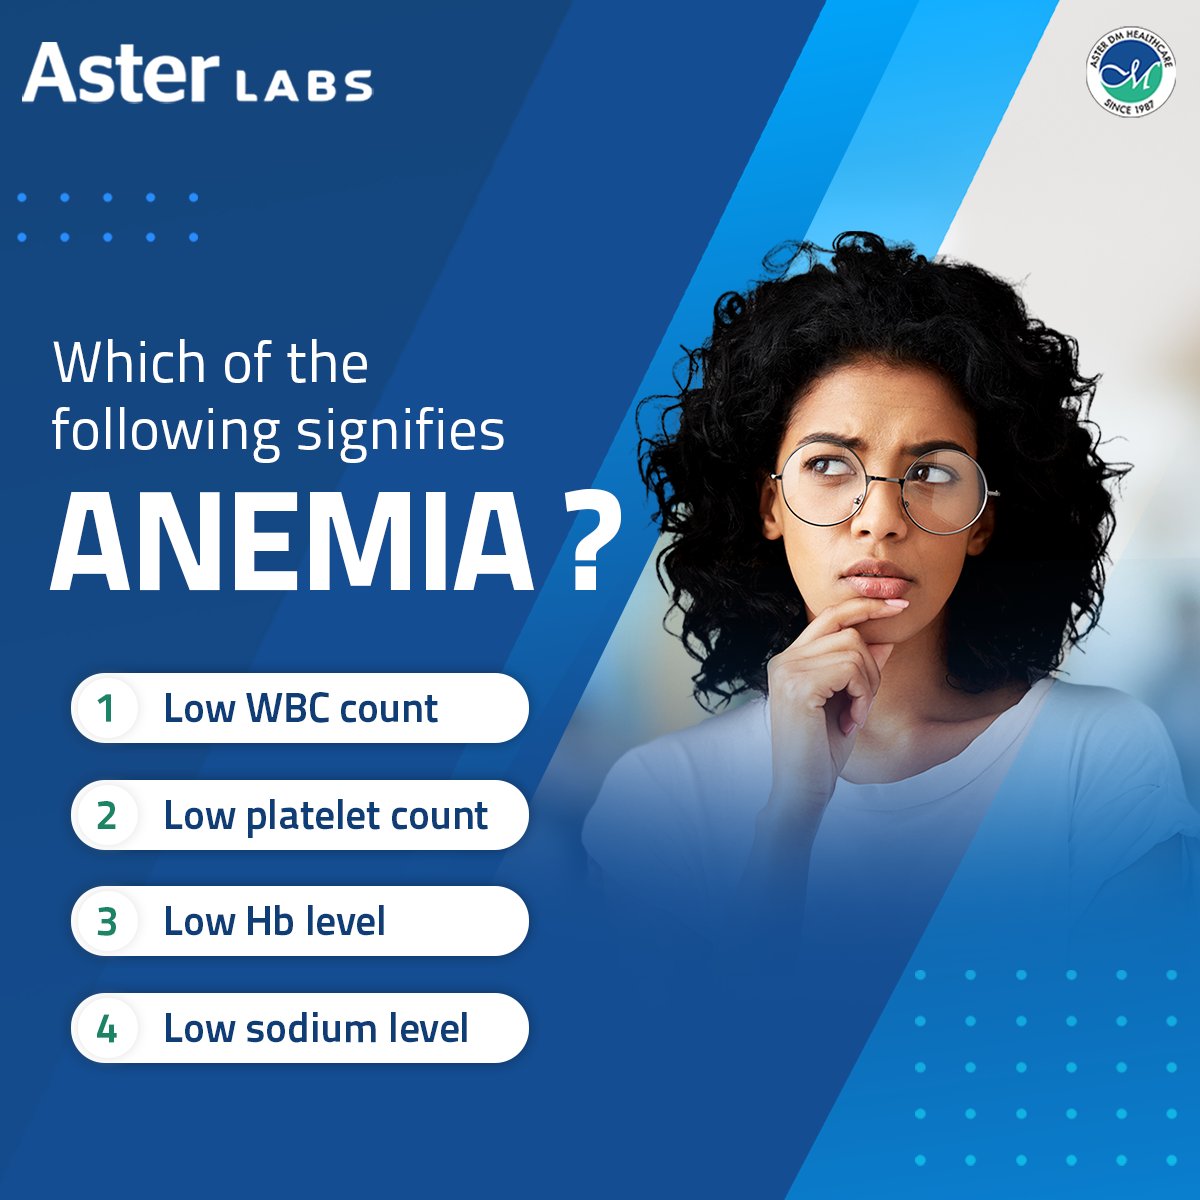 Test your knowledge and pick an option! Comment below what you think is the correct answer. 

#Asterlabs #quiz #labs #diagnosticlabs